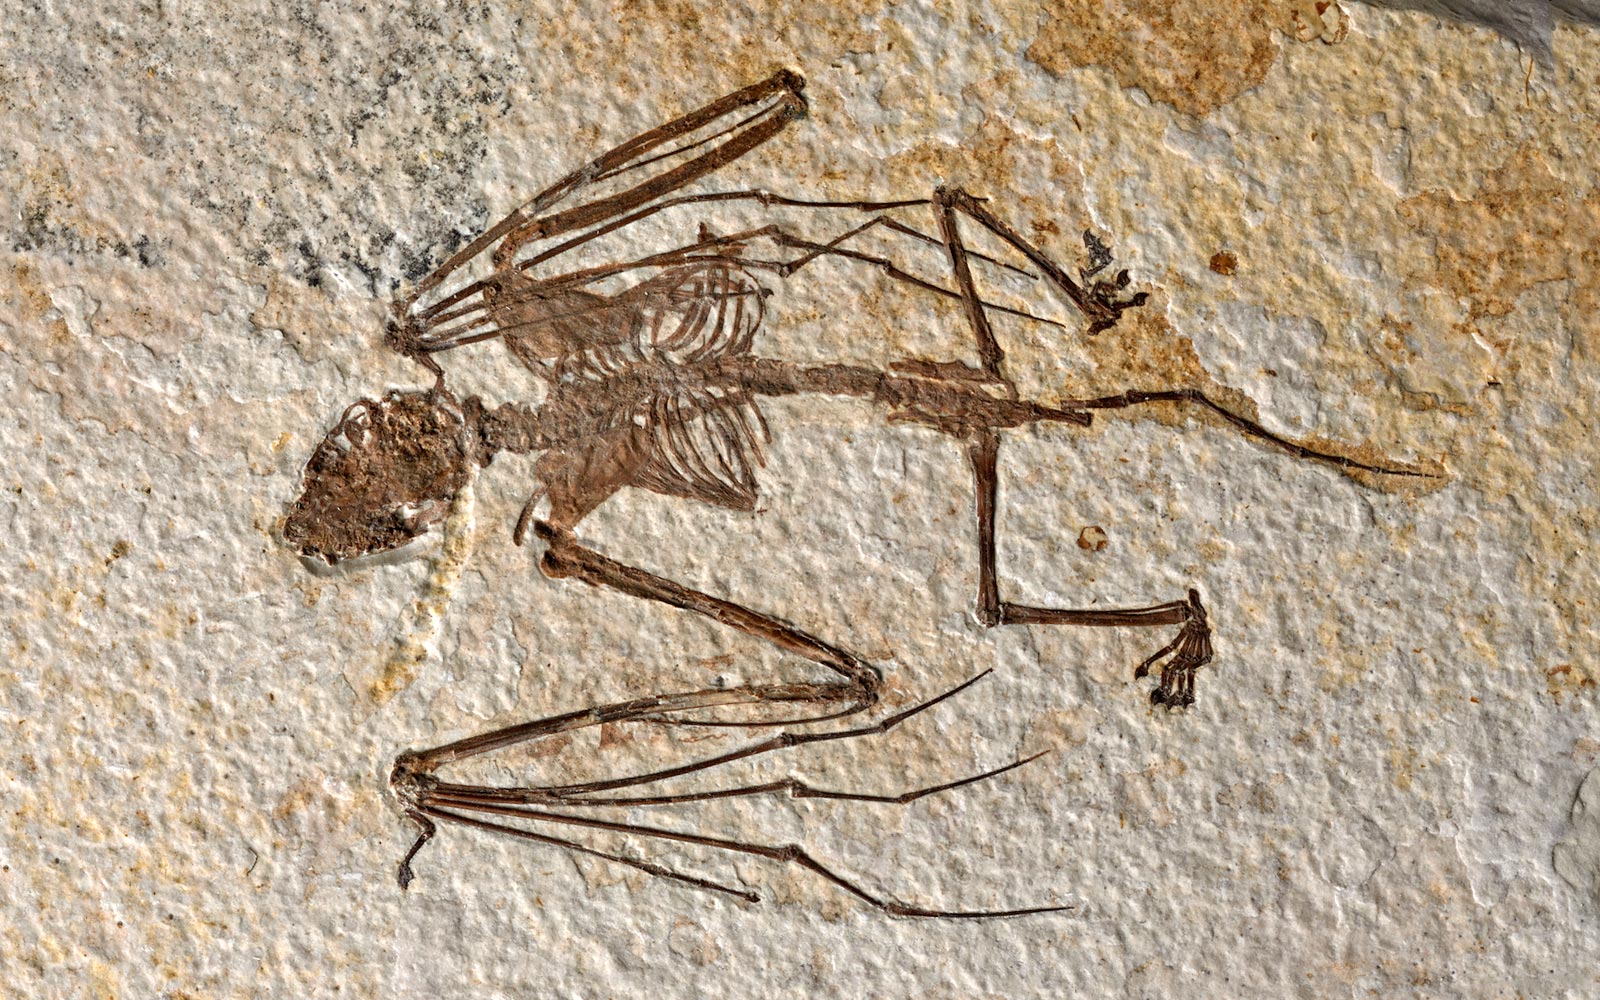 A 52-million-year-old bat skeleton reveals new species and clues to the evolution of flying mammals